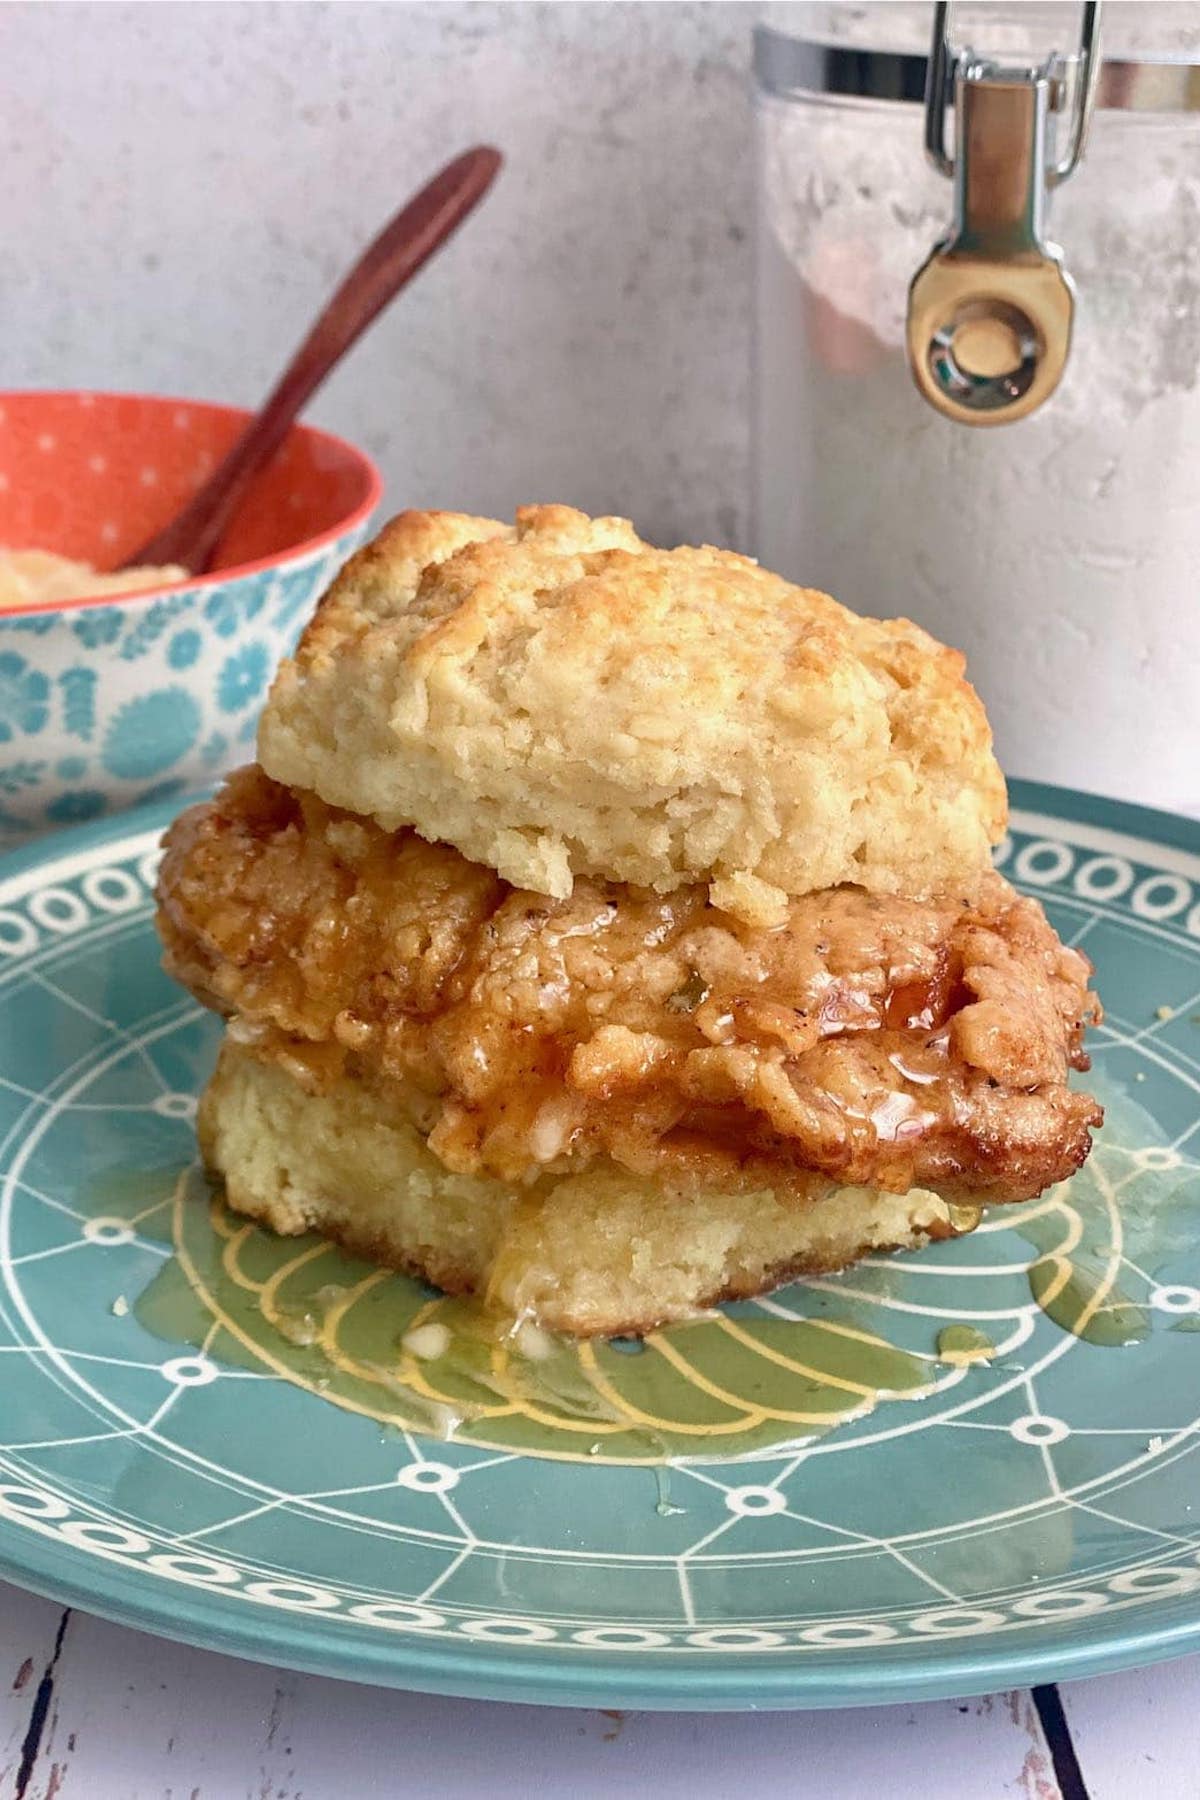 A fried chicken fillet covered in honey on a buttermilk biscuit.